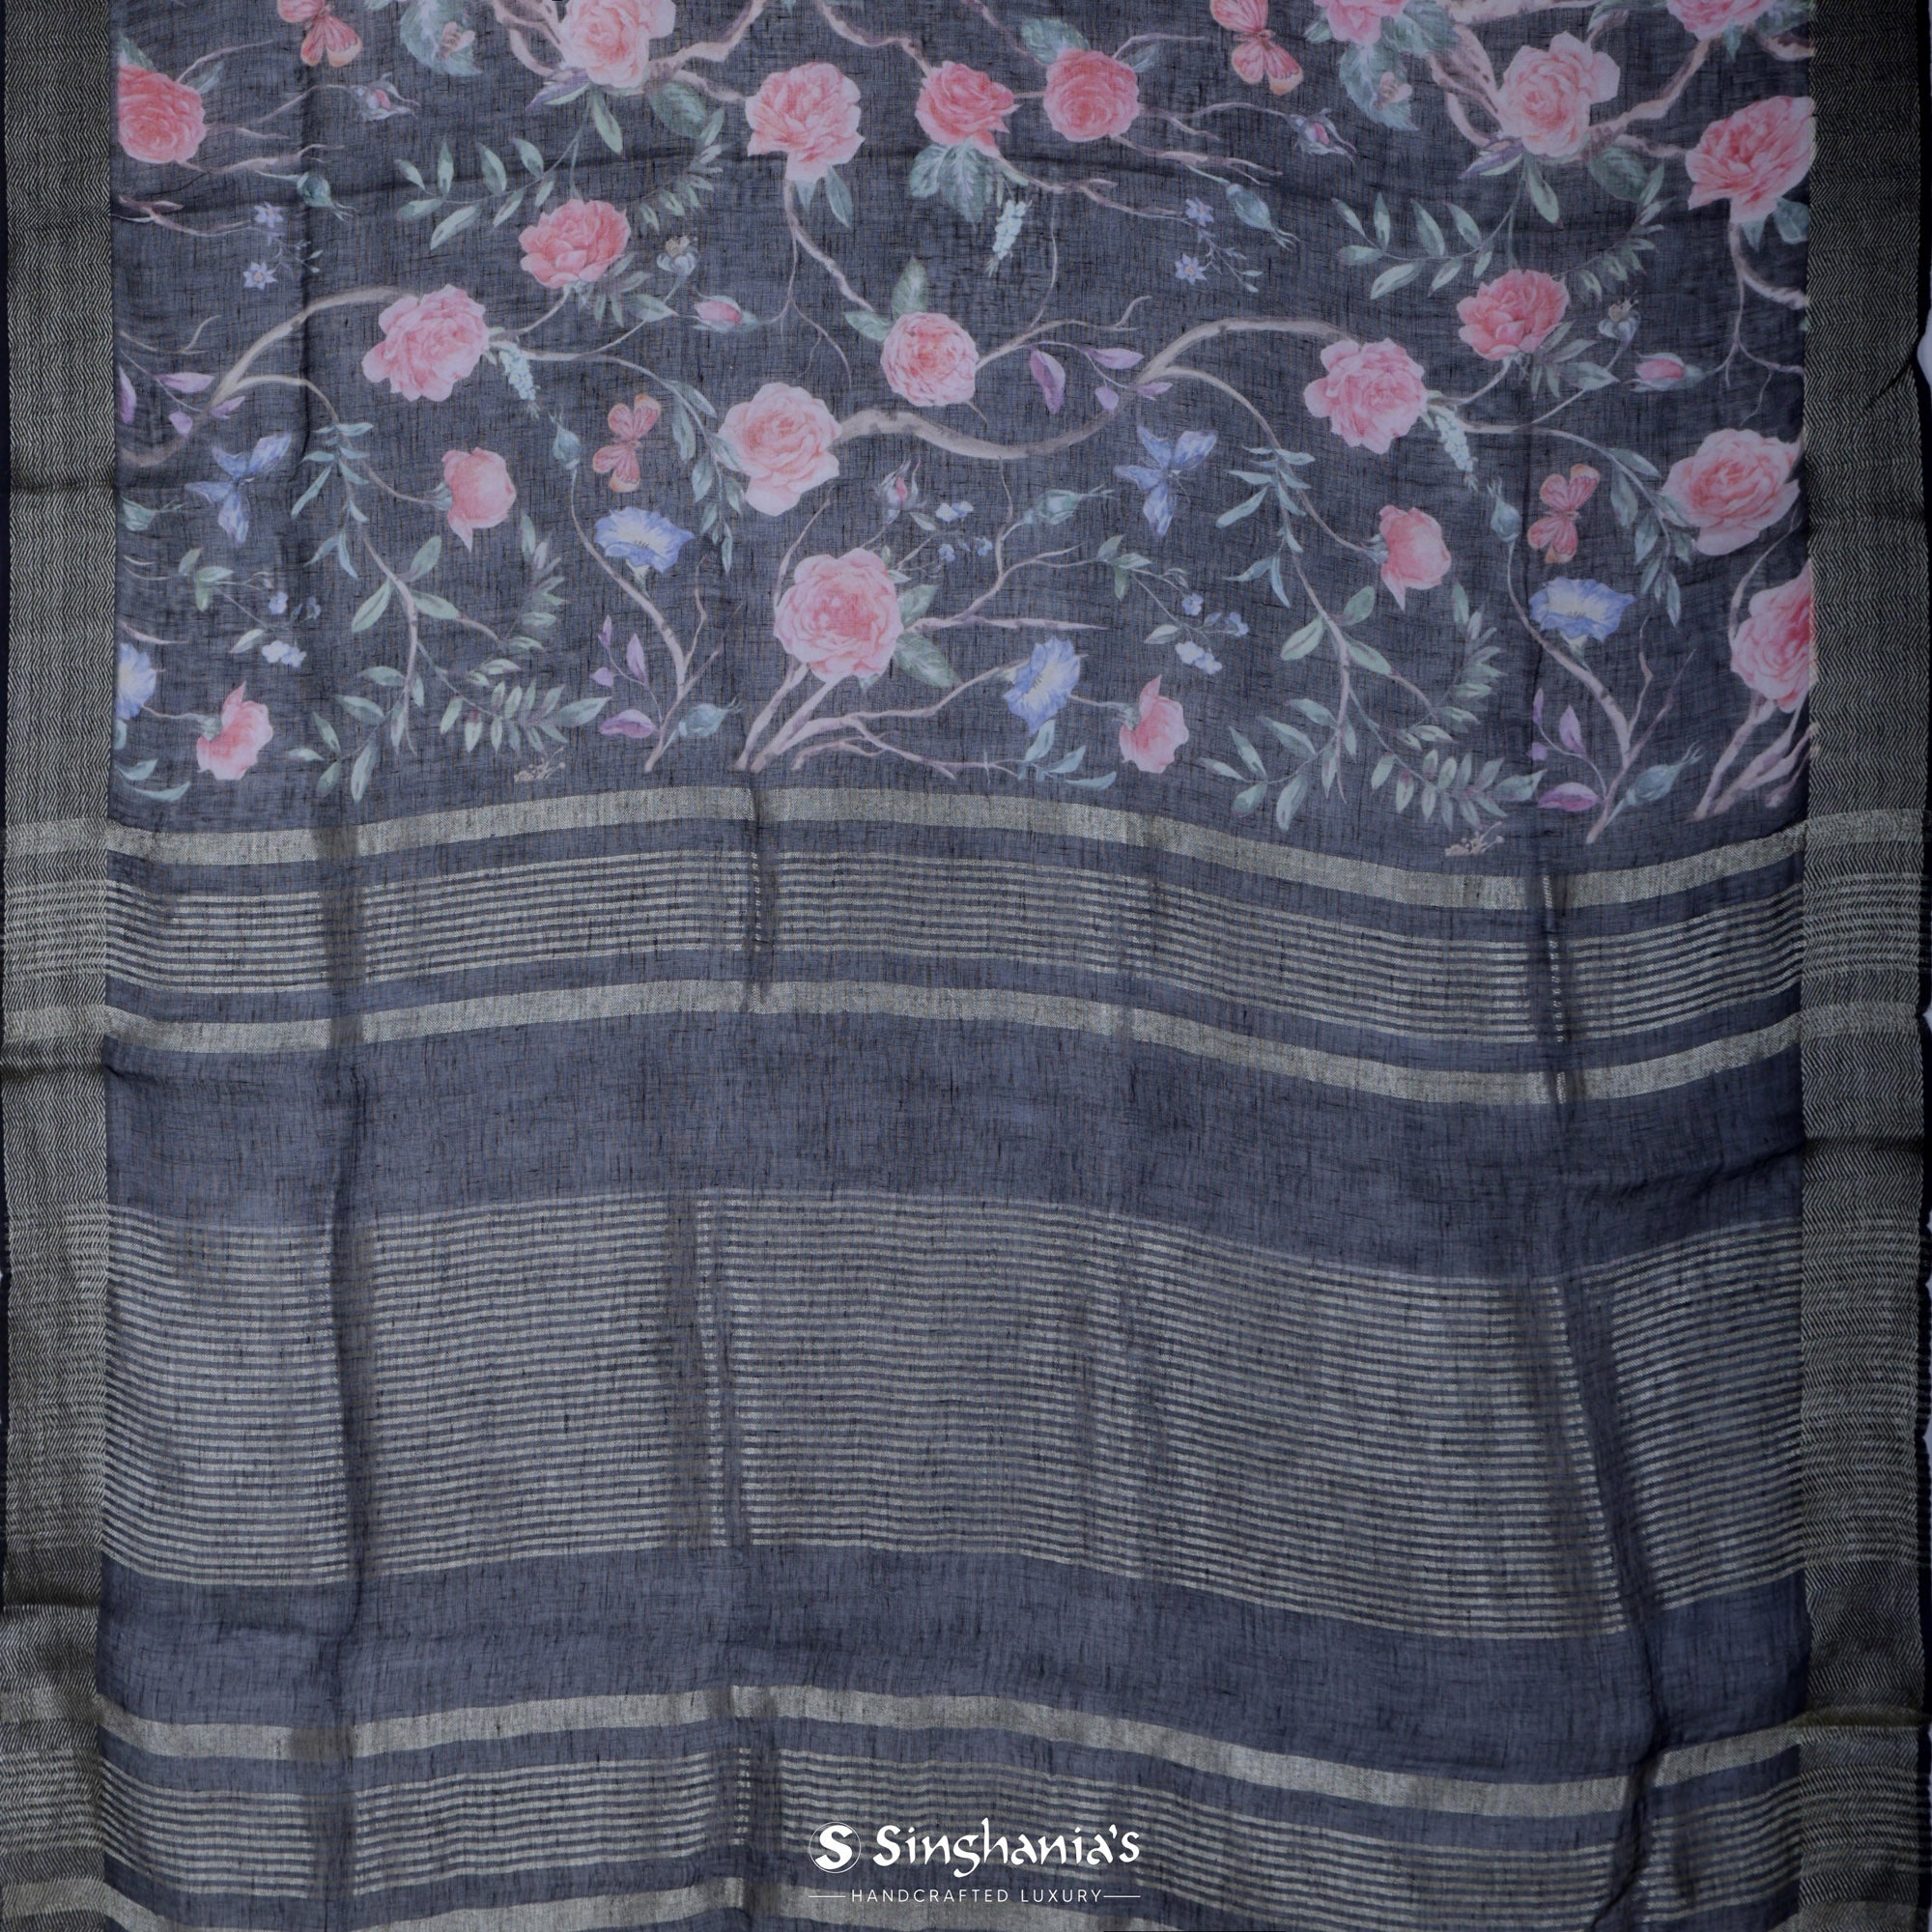 Black Printed Linen Saree With Floral Jaal Pattern